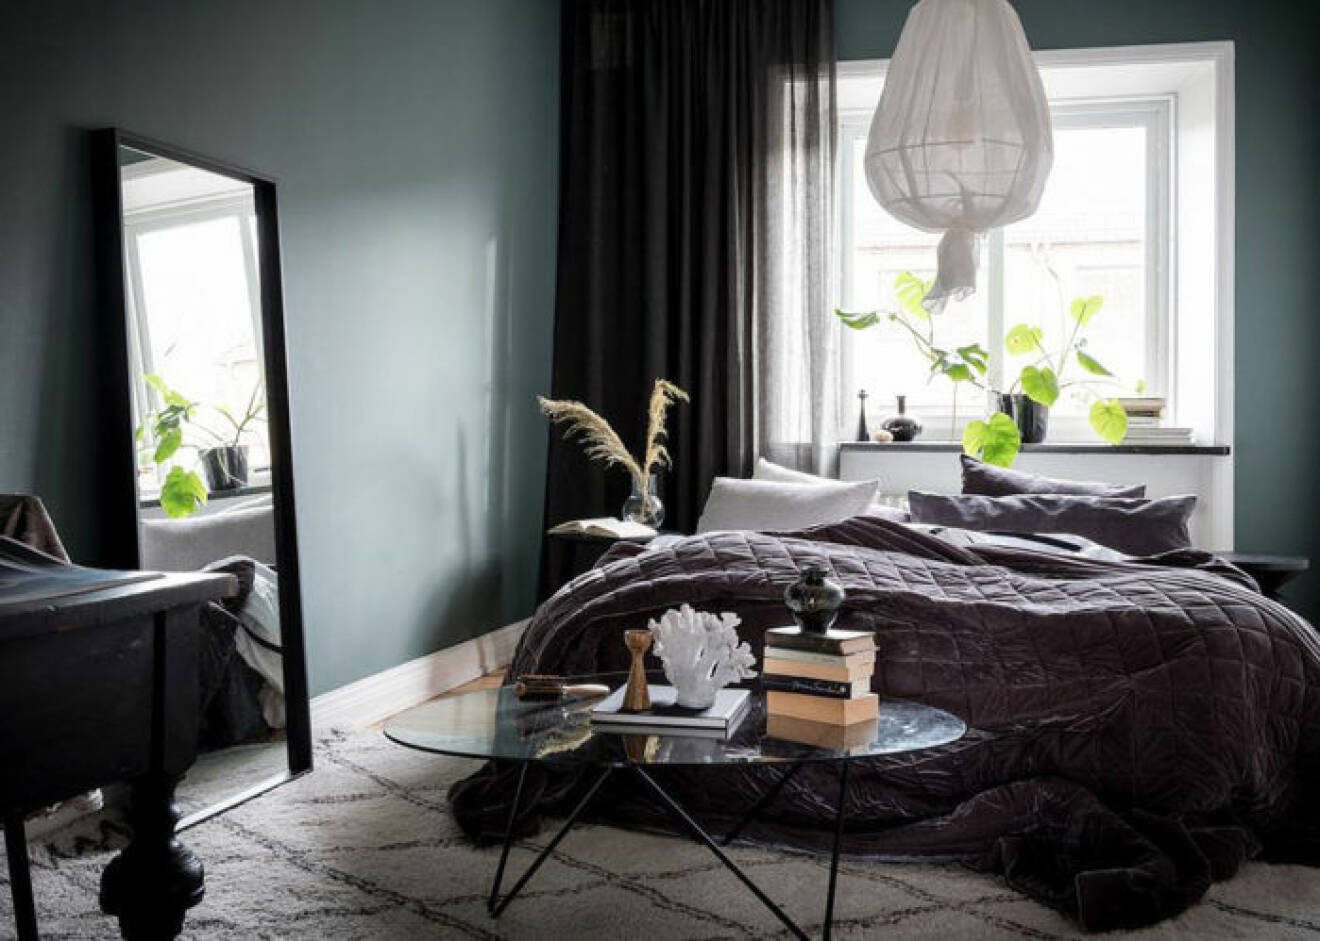 Scandinavian decoration and ideas. Bedroom with plants and mirror, painted walls and rug. 